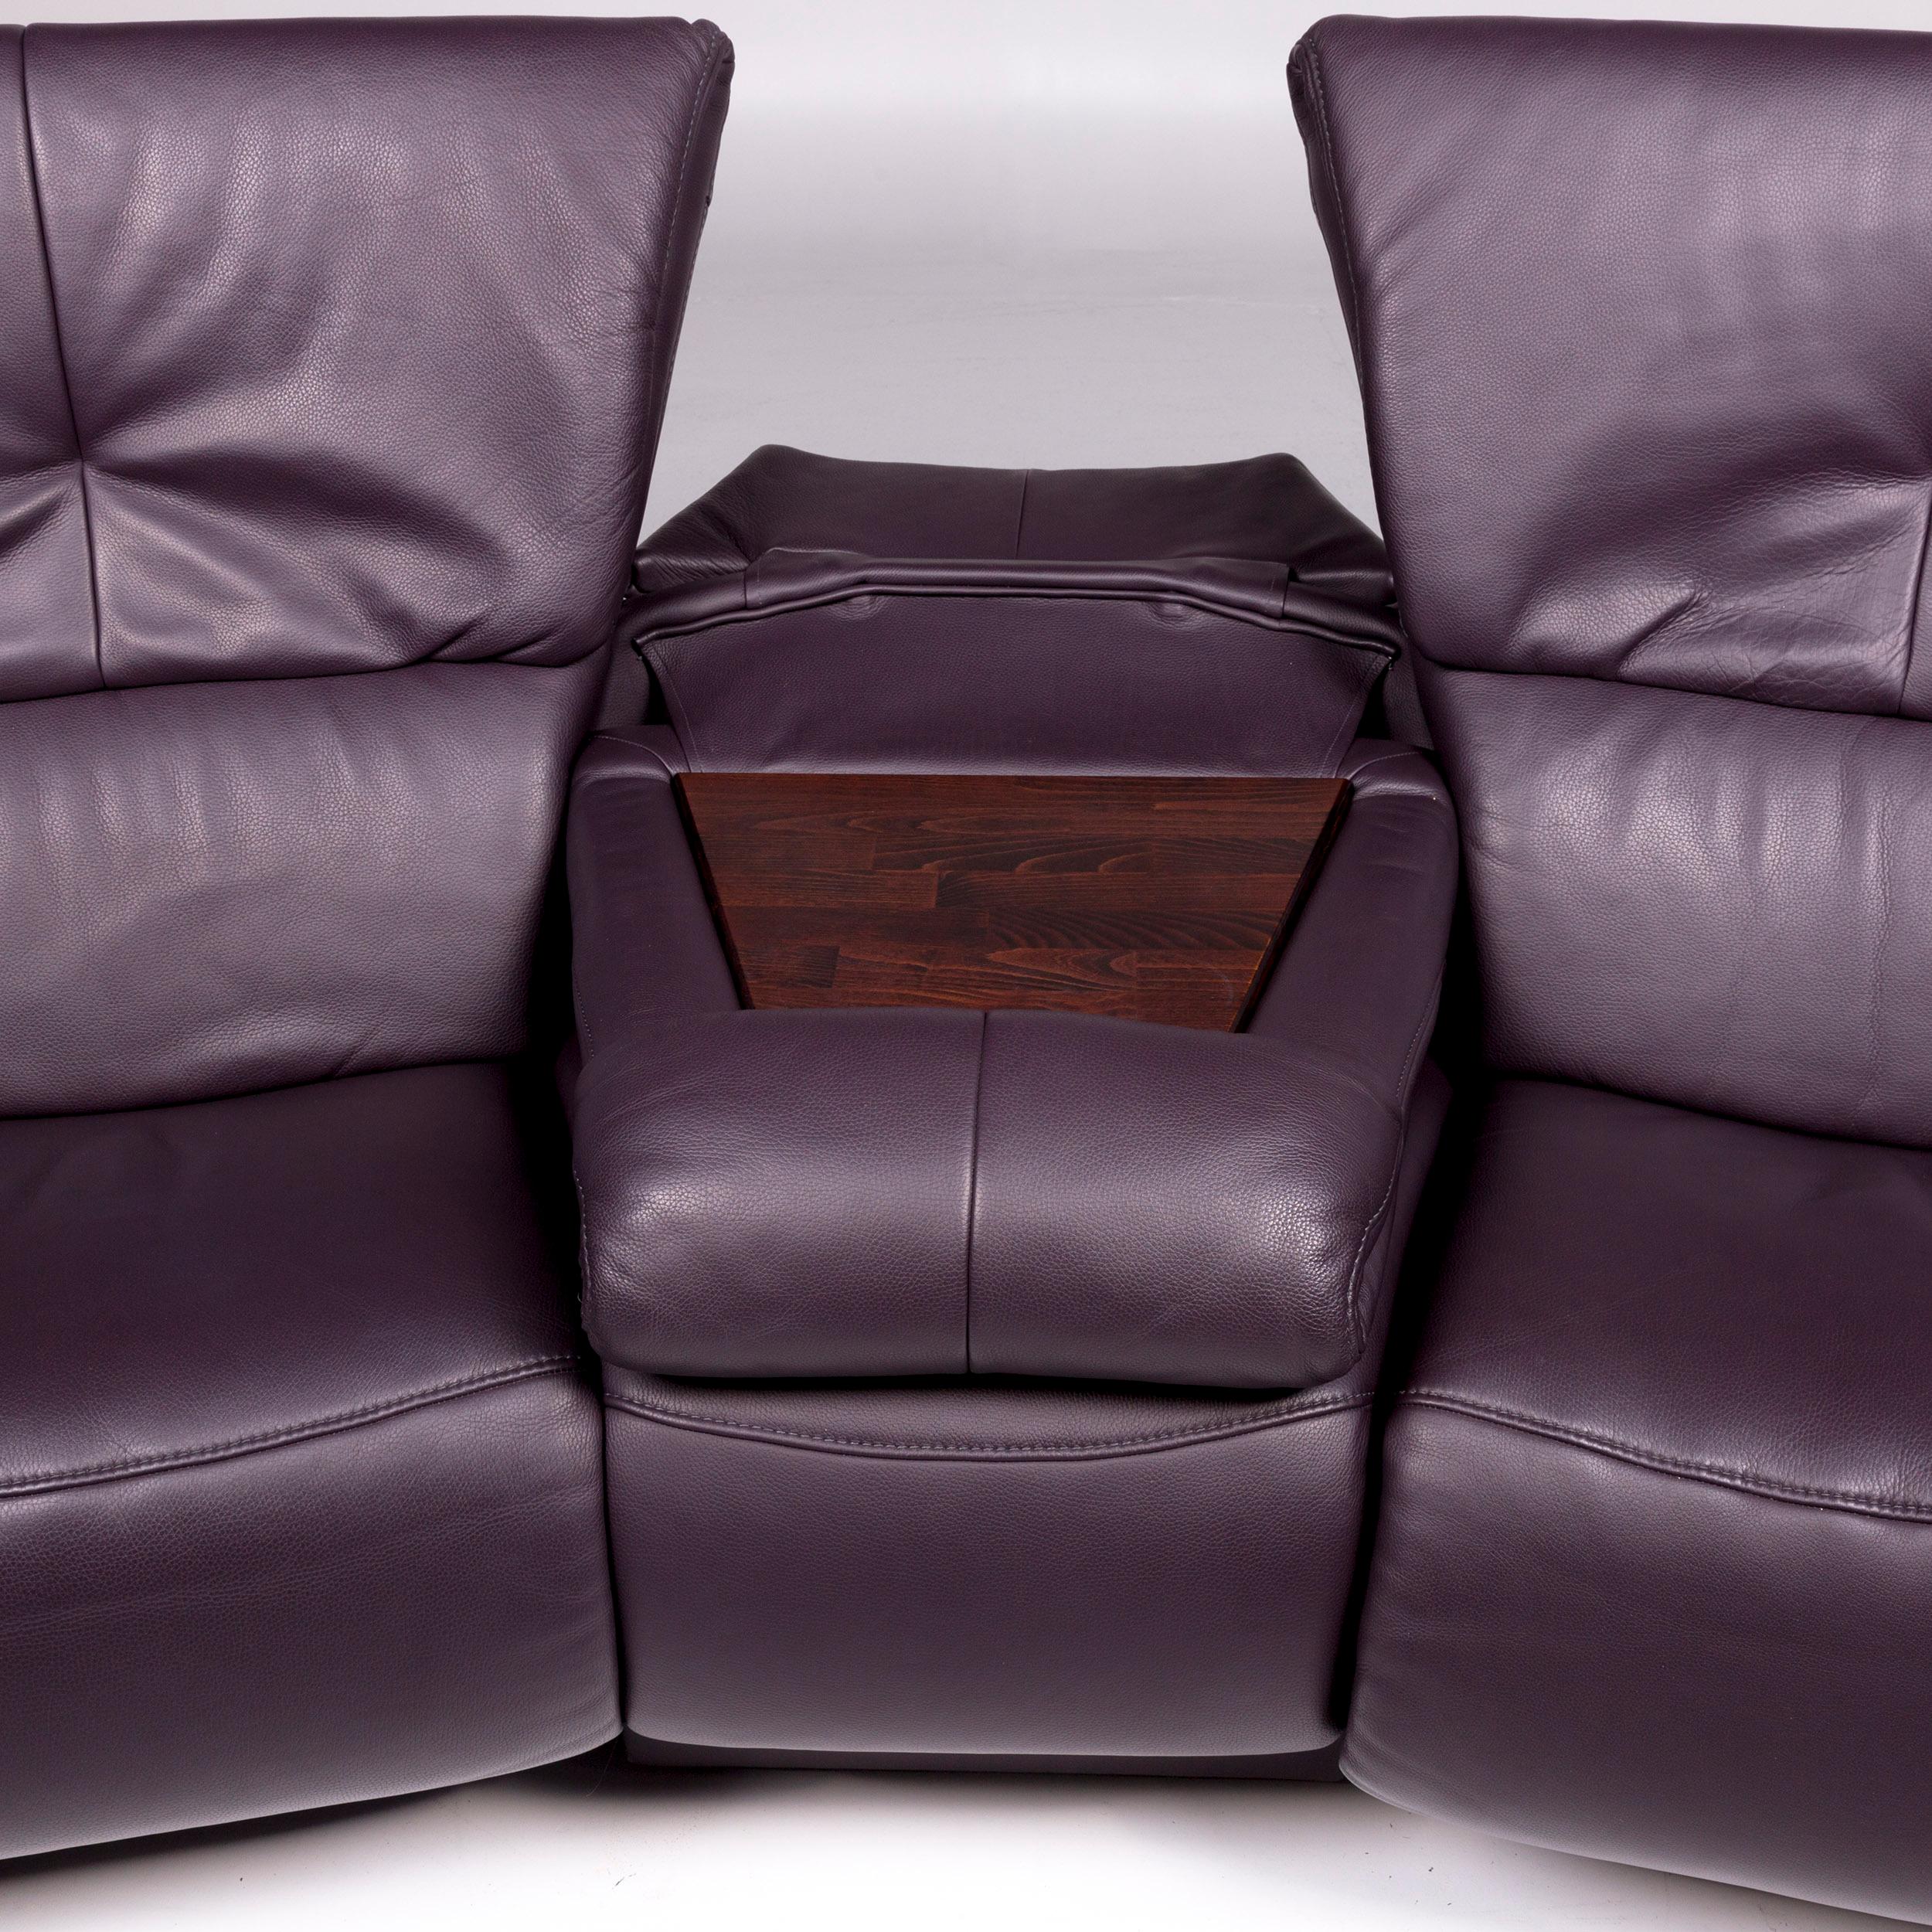 Polish Himolla Leather Sofa Purple Eggplant Two-Seat Function Relax Function Couch For Sale